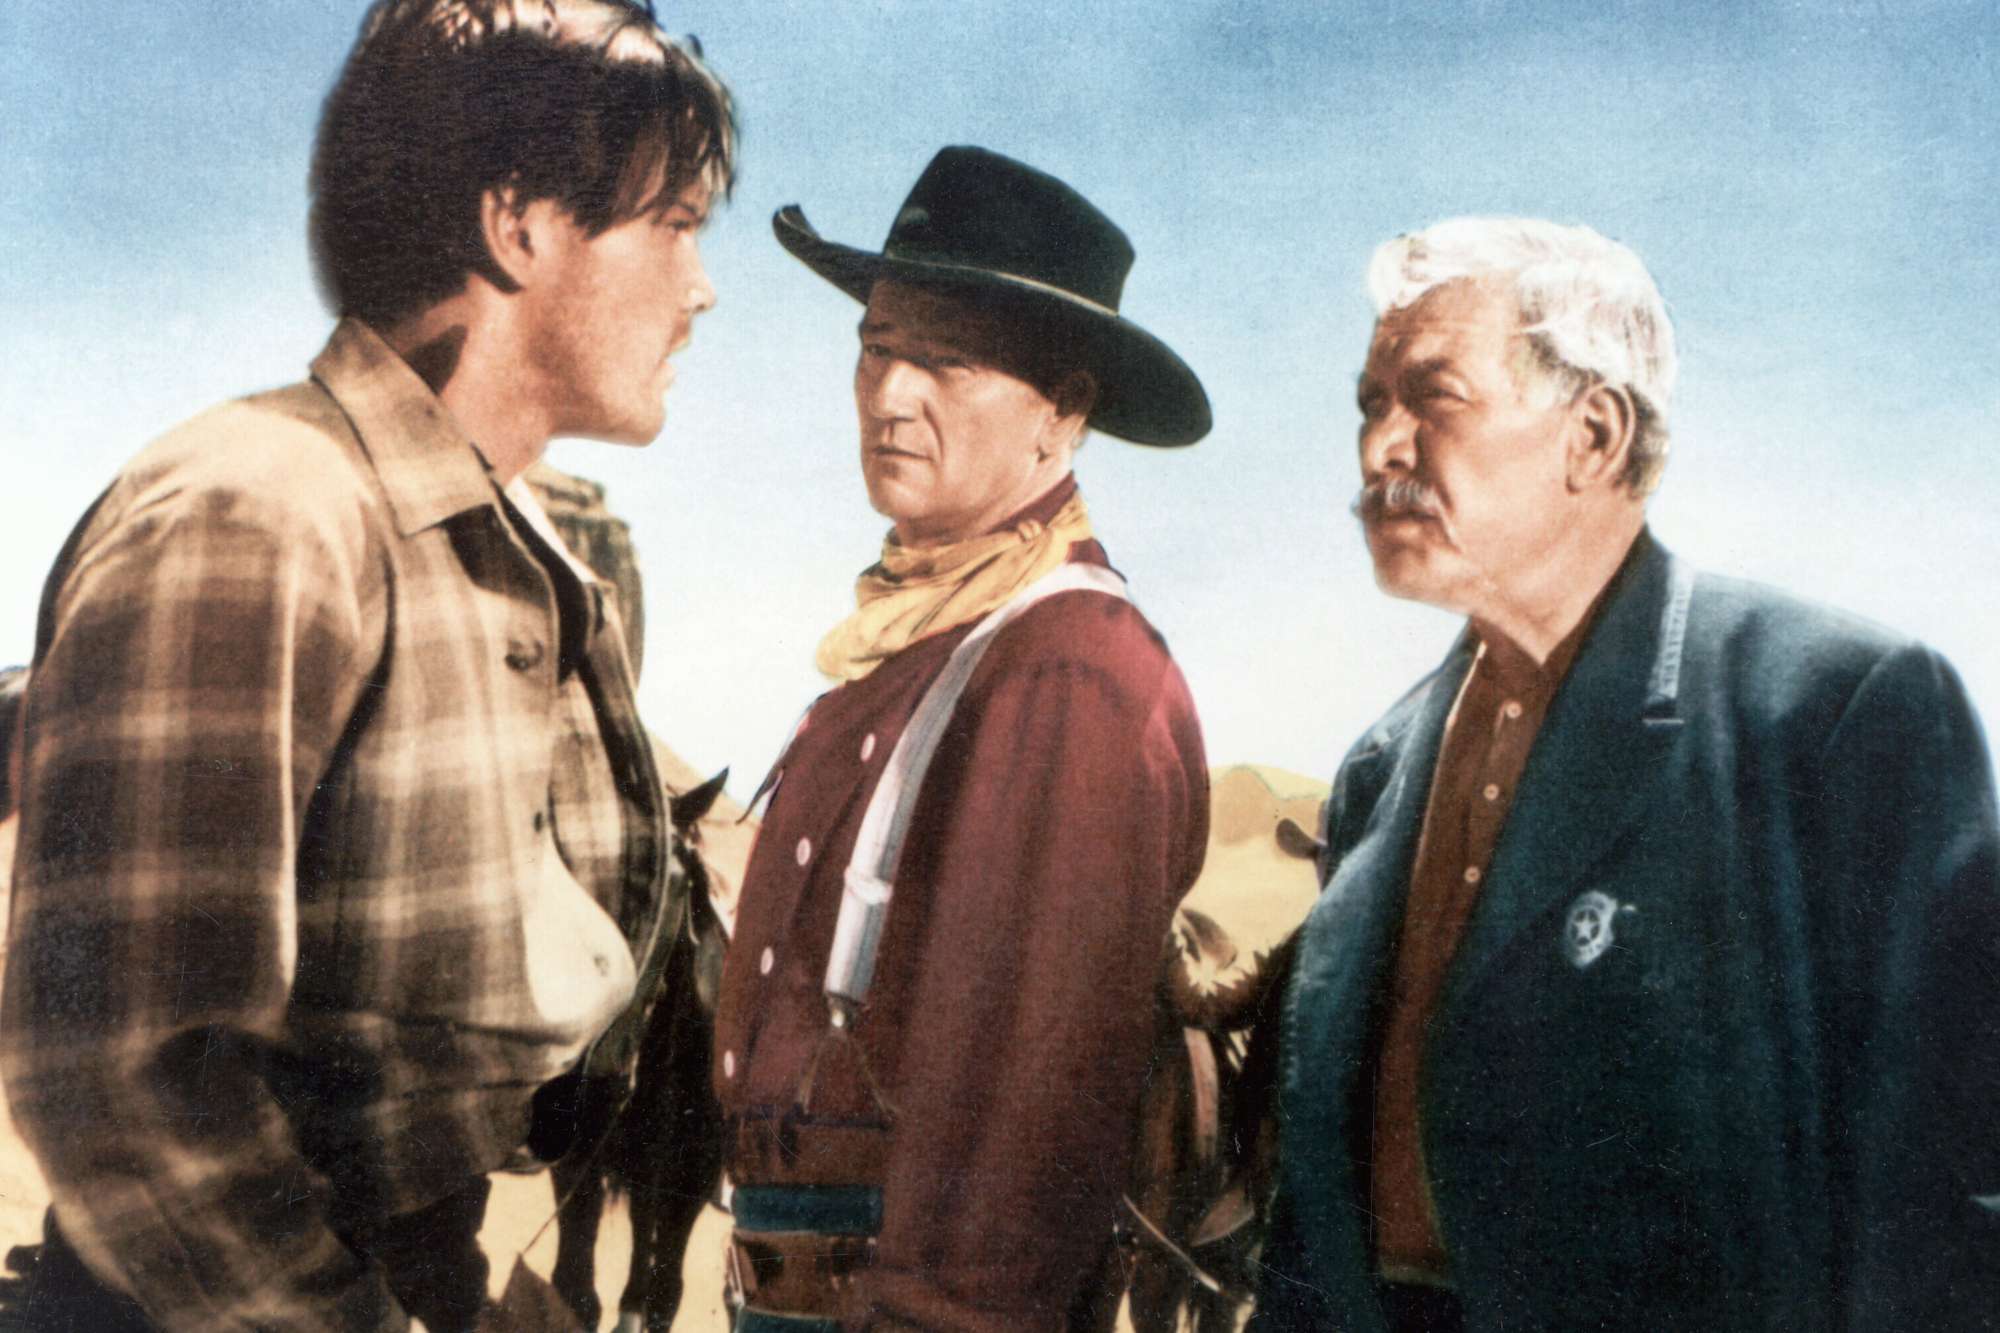 'The Searchers' Jeffrey Hunter as Martin Pawley, John Wayne as Ethan Edwards and Ward Bond as Rev. Capt. Samuel Johnston Clayton wearing Western costumes standing in the desert looking at one another